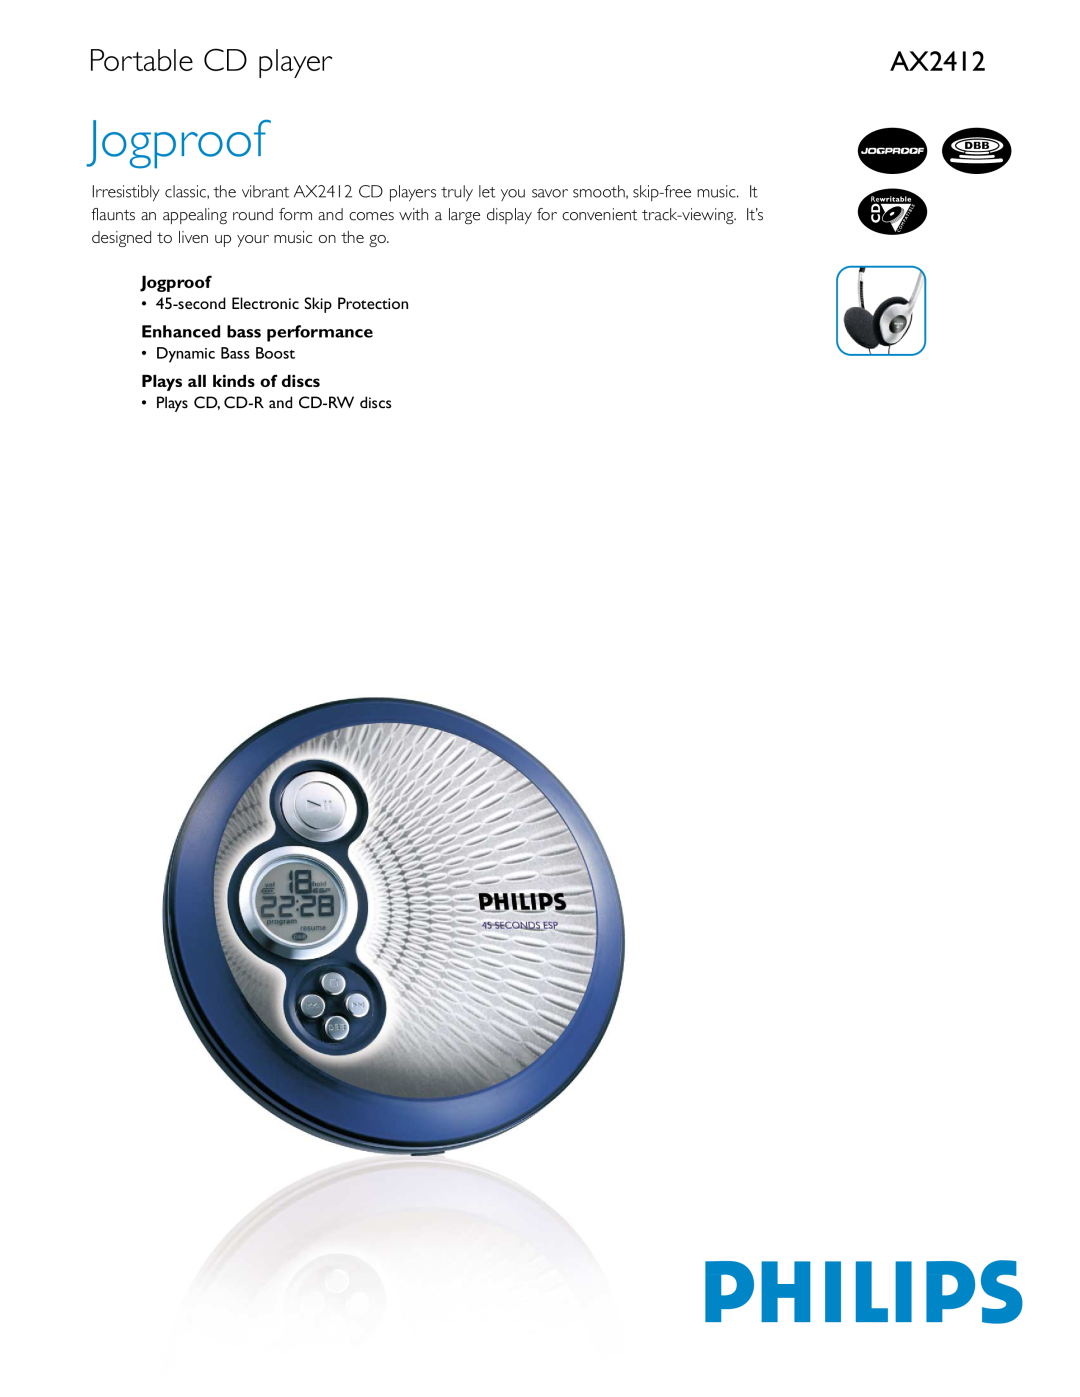 Philips AX2412 manual Portable CD player, Jogproof, Enhanced bass performance, Plays all kinds of discs 